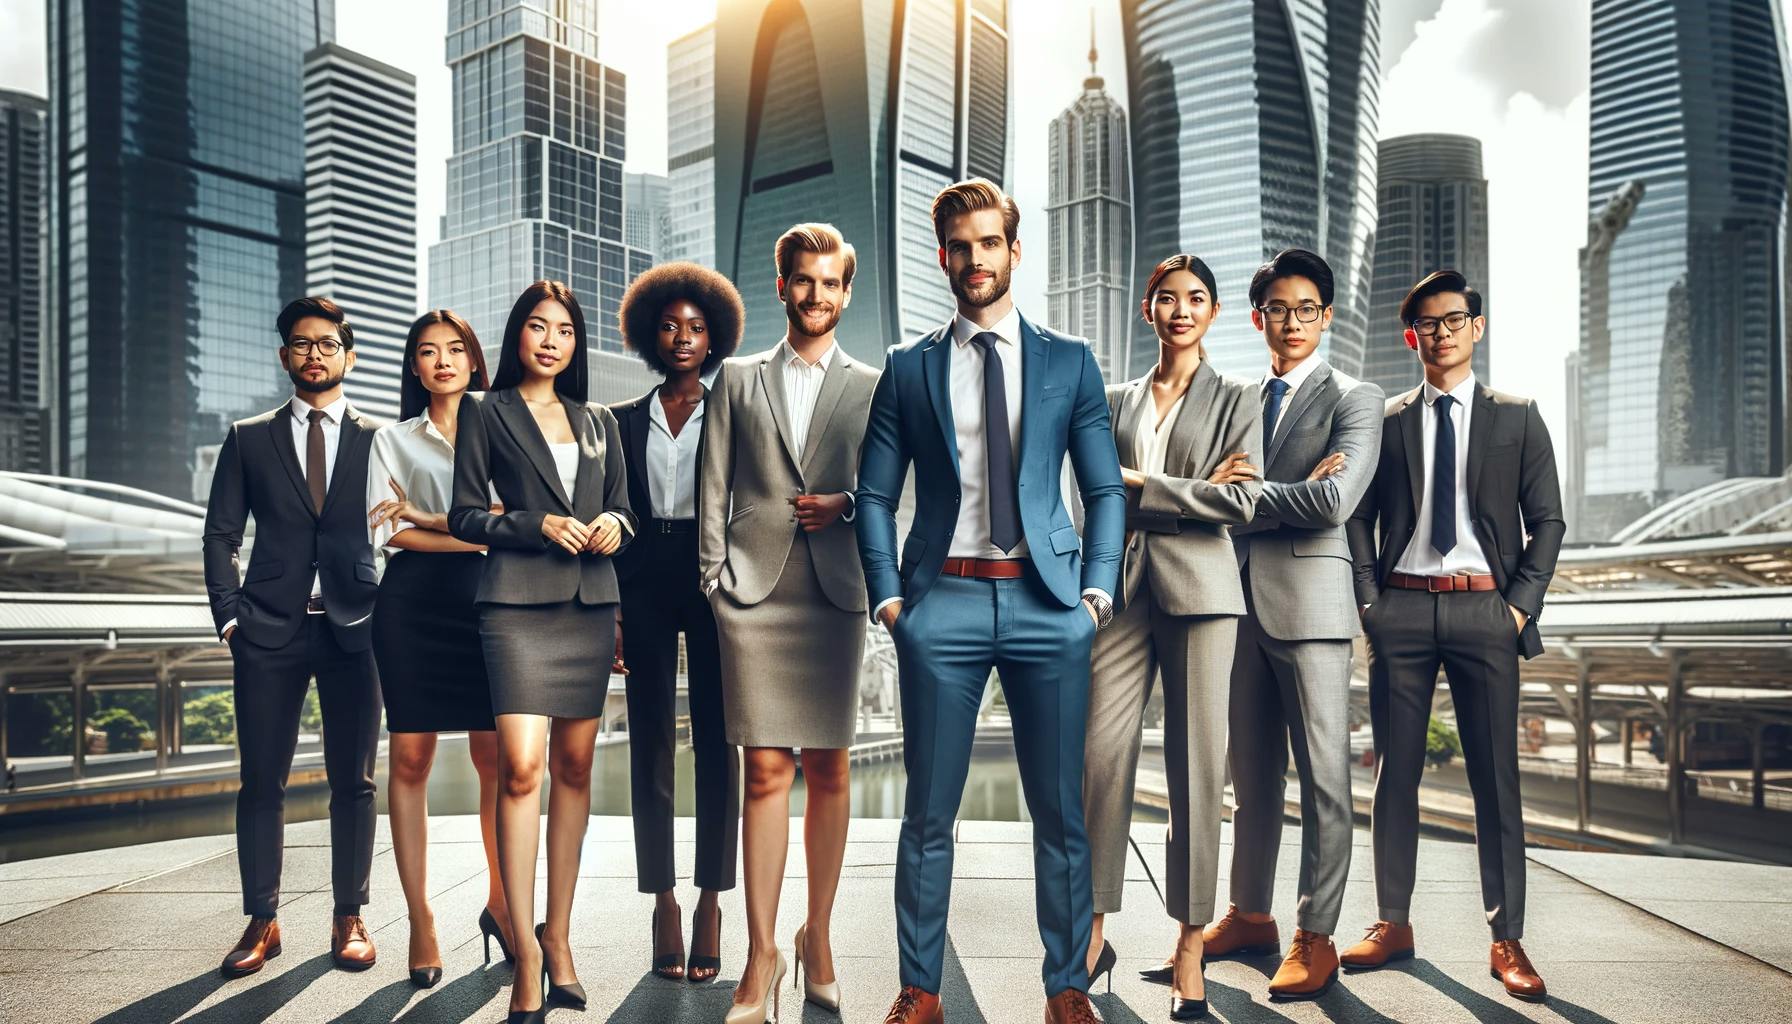 A group of professionals from diverse backgrounds standing together, dressed in business attire. They are smiling at the camera, projecting confidence and collaboration.